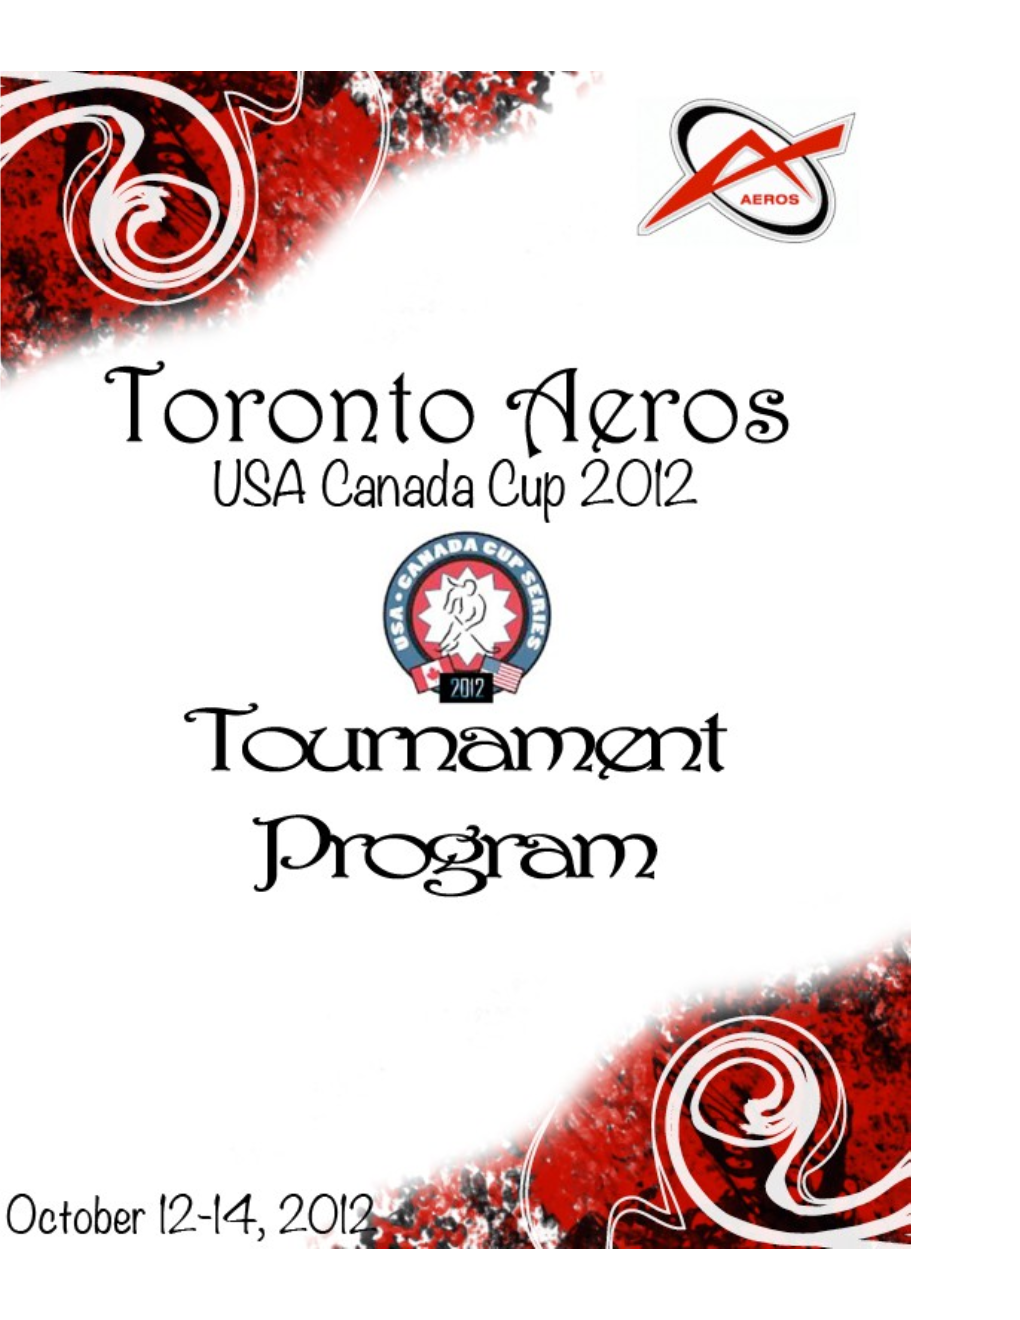 It Is Our Privilege to Host the Toronto Aeros 2012 USA-CANADA CUP SERIES Invitational Tournament